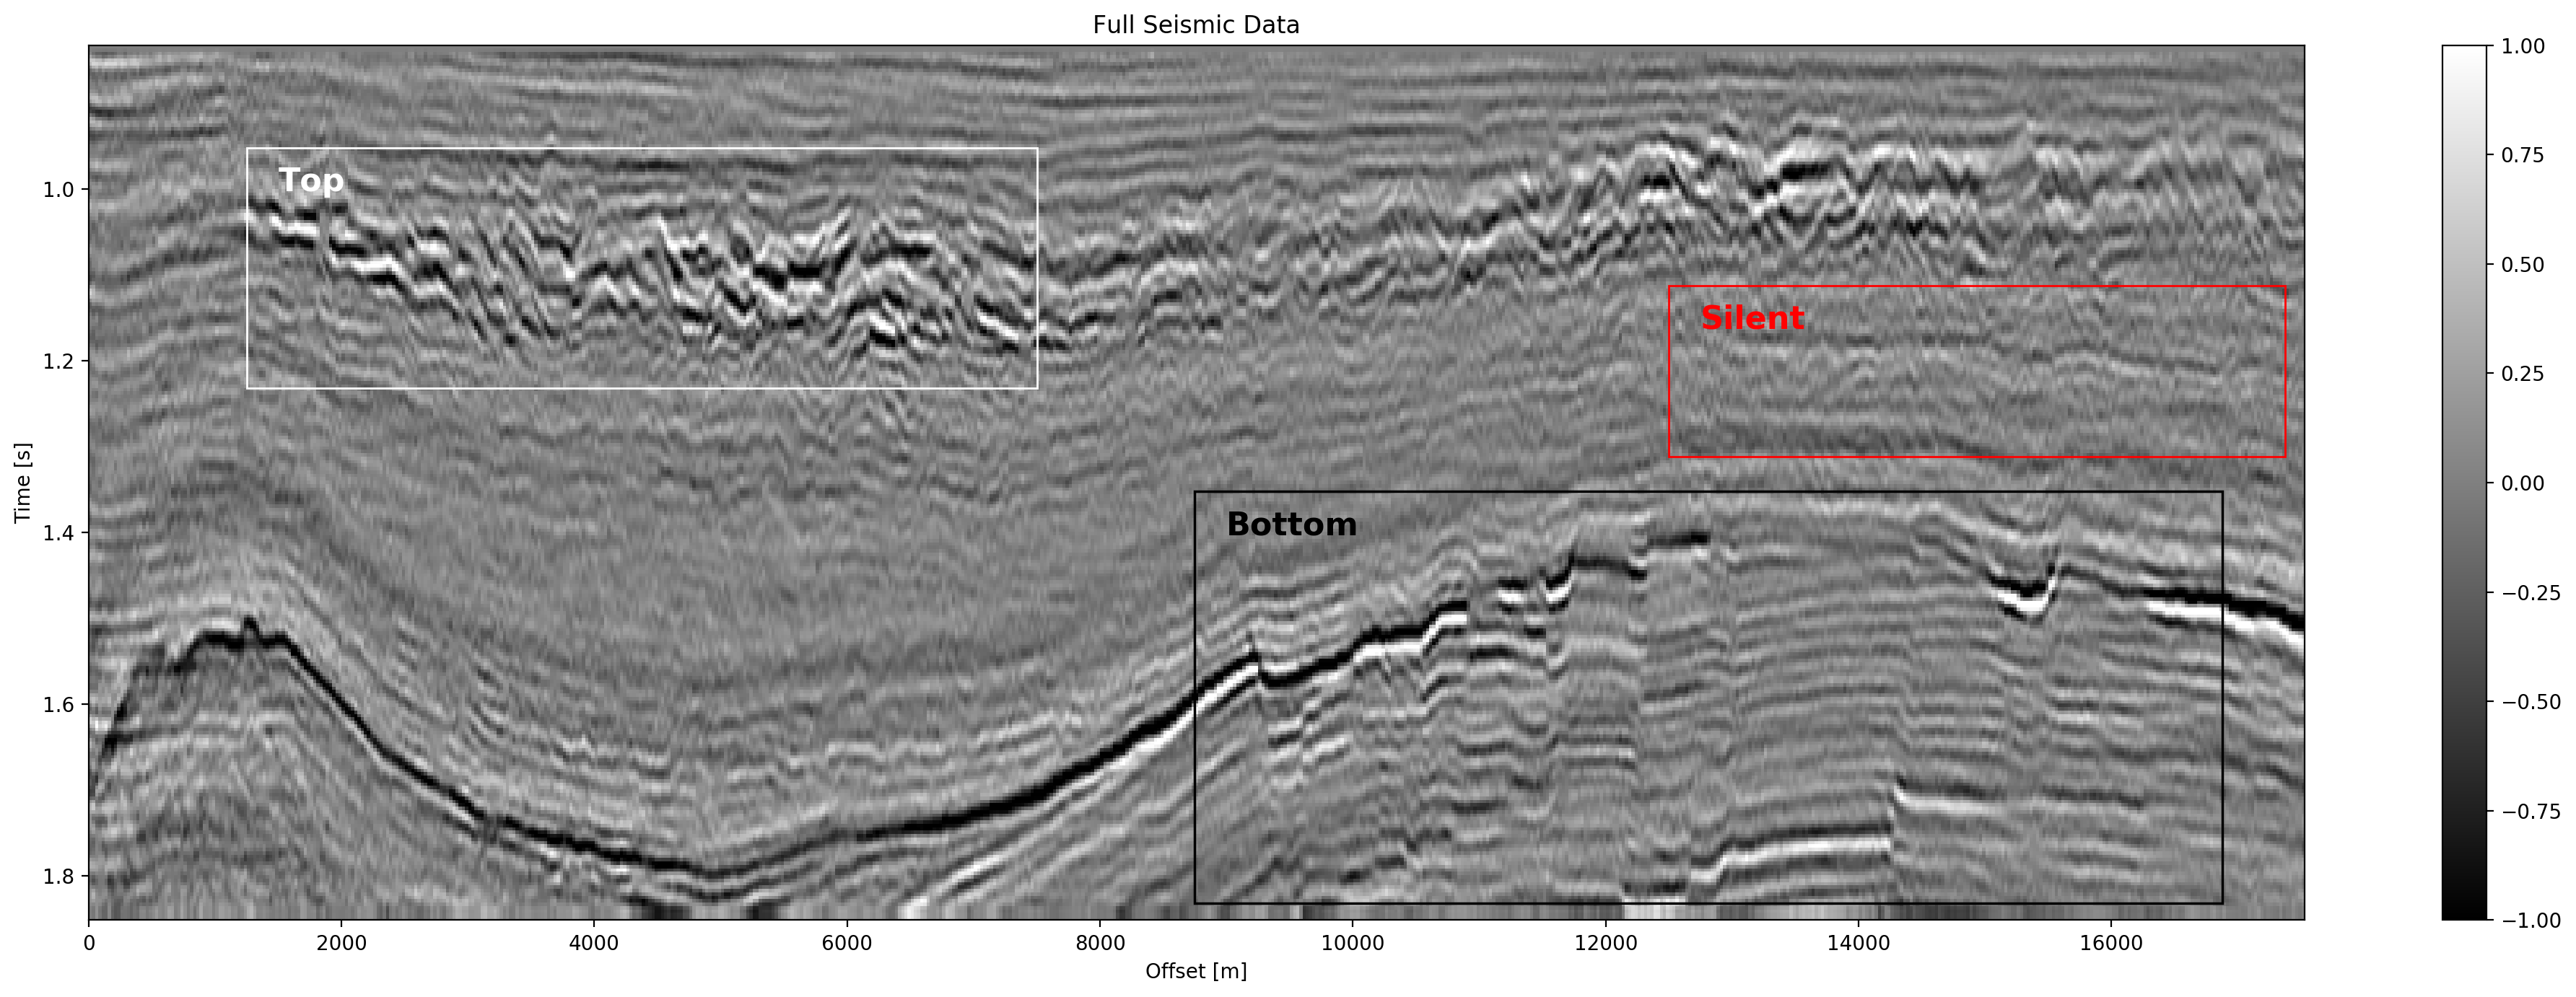 Seismic Test Data with marked section for closer inspection. We chose the "top" section for it’s faulted chaotic texture, "bottom" for the faulted blocks, and "silent" for a noisy but geologically uninteresting section.